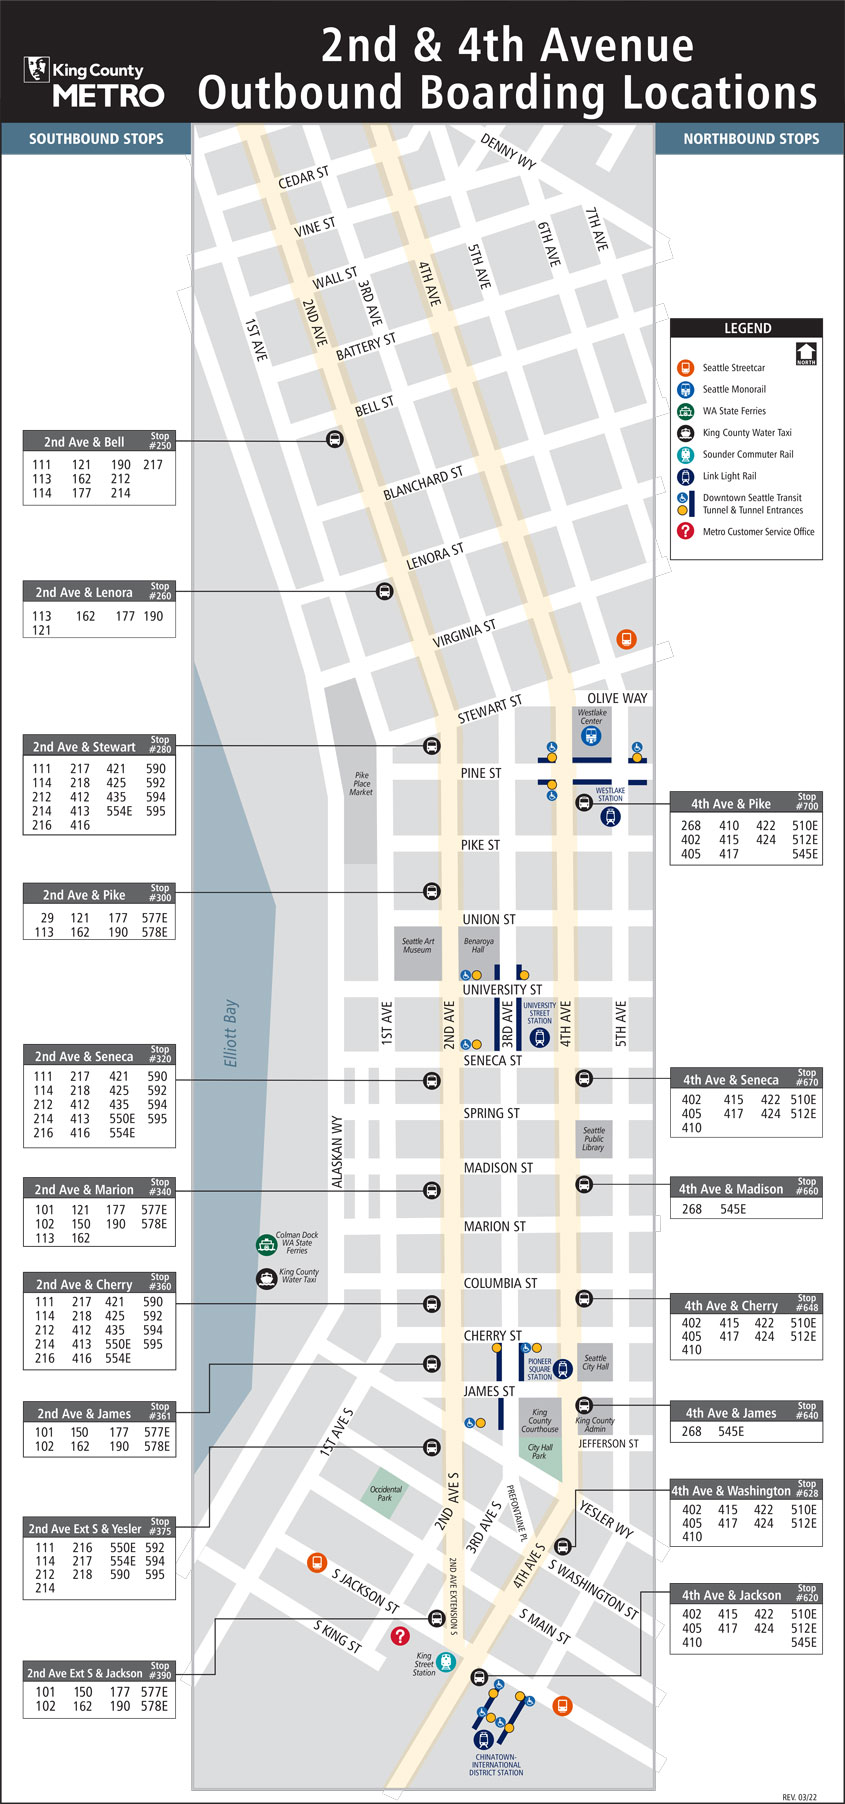 2nd & 4th Avenue boarding location map